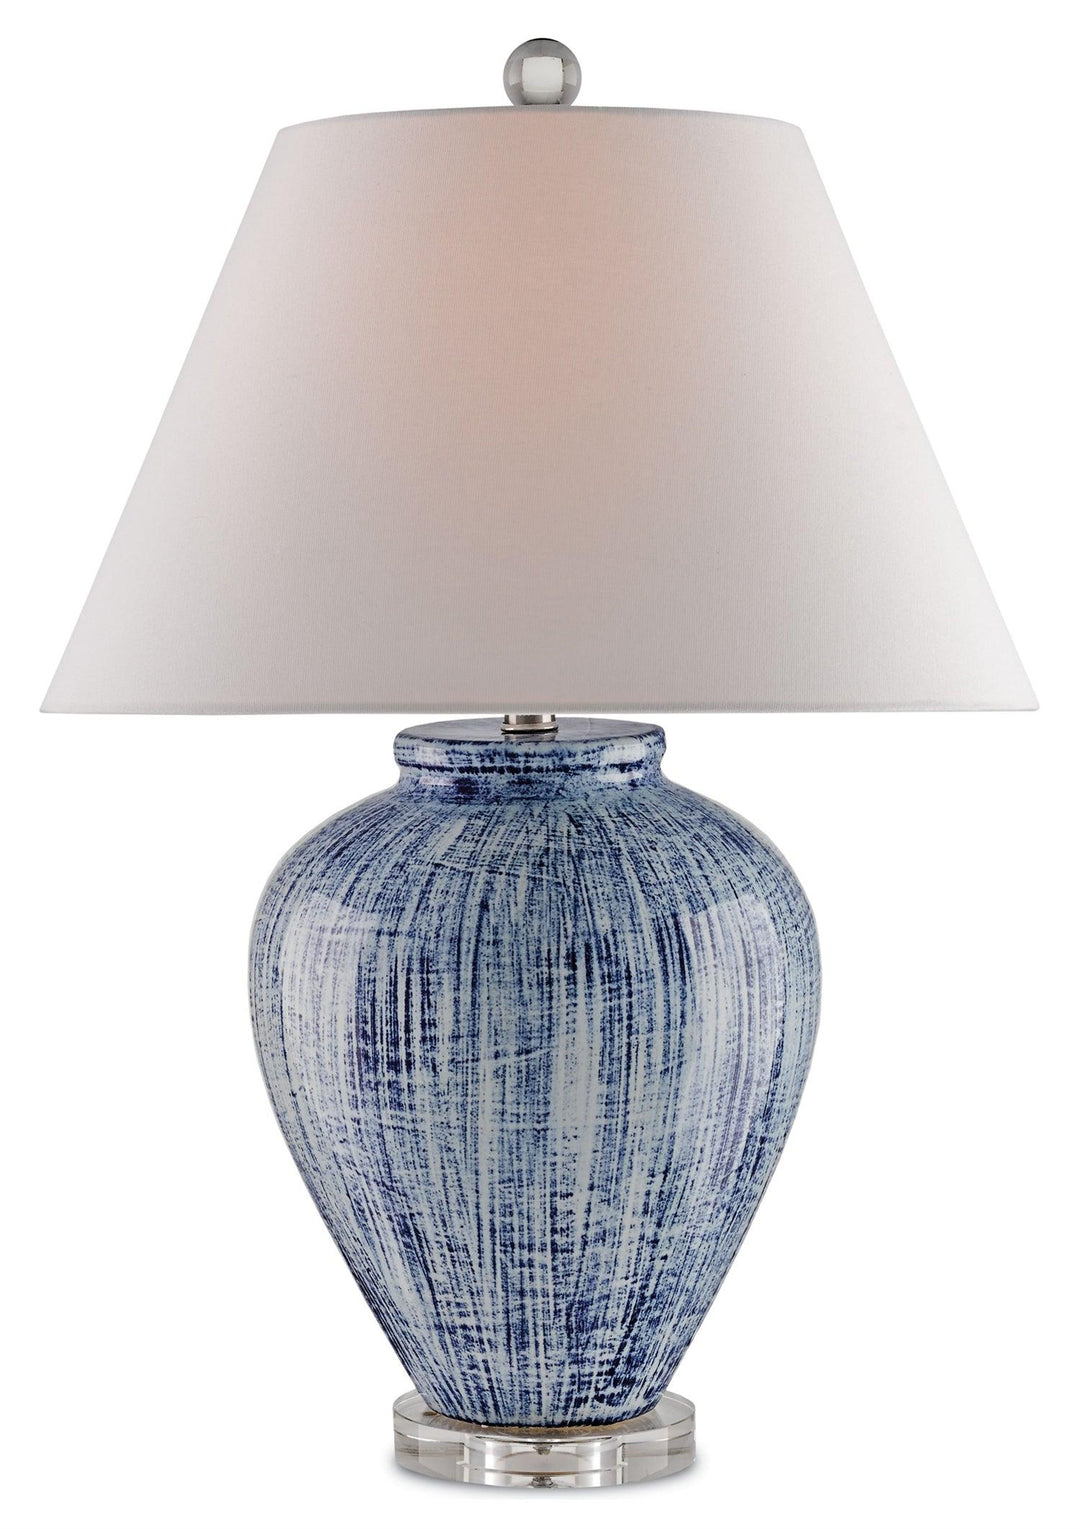 Malaprop Table Lamp - Casey & Company